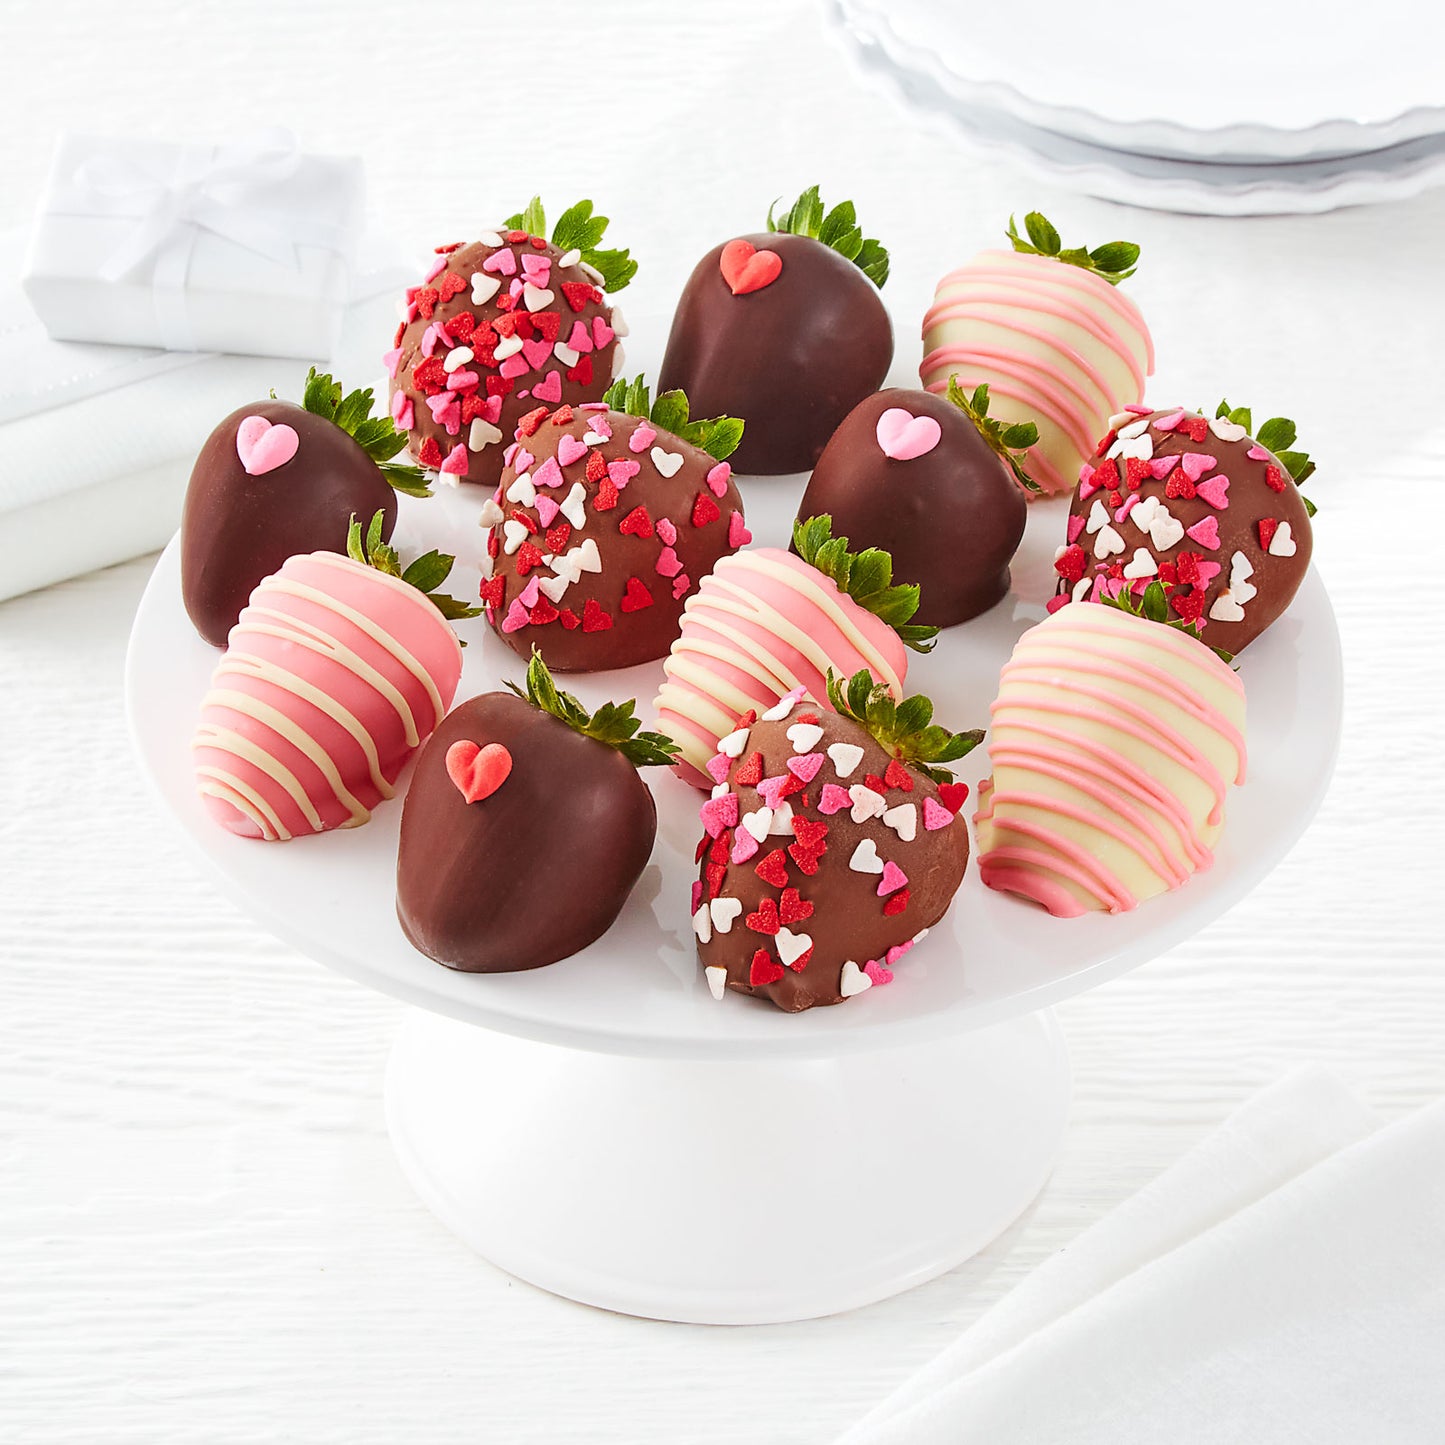 Pink and red chocolate covered strawberries